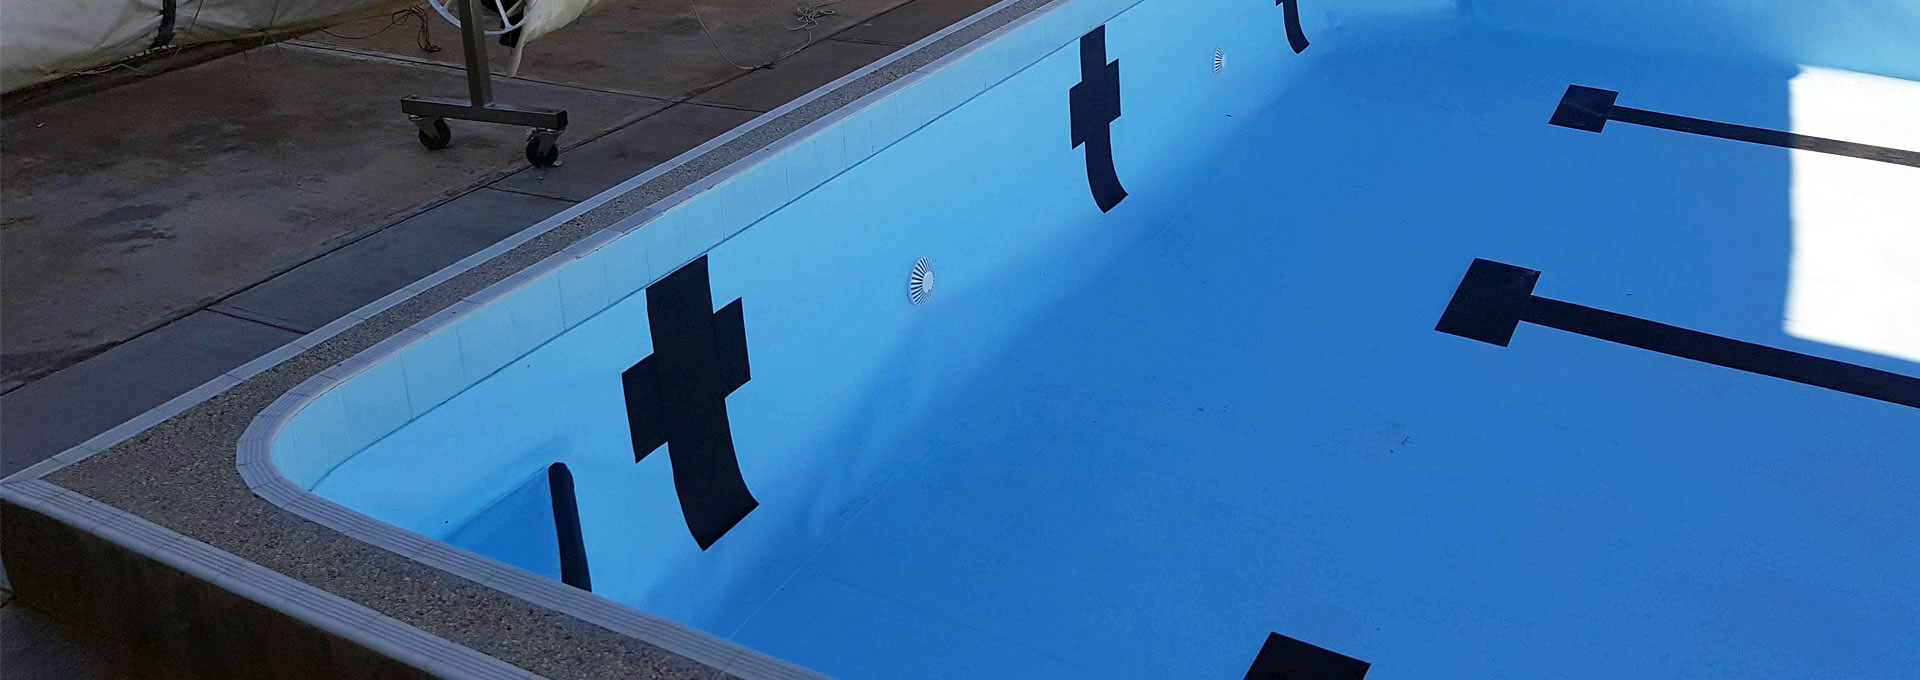 Commercial pool liner